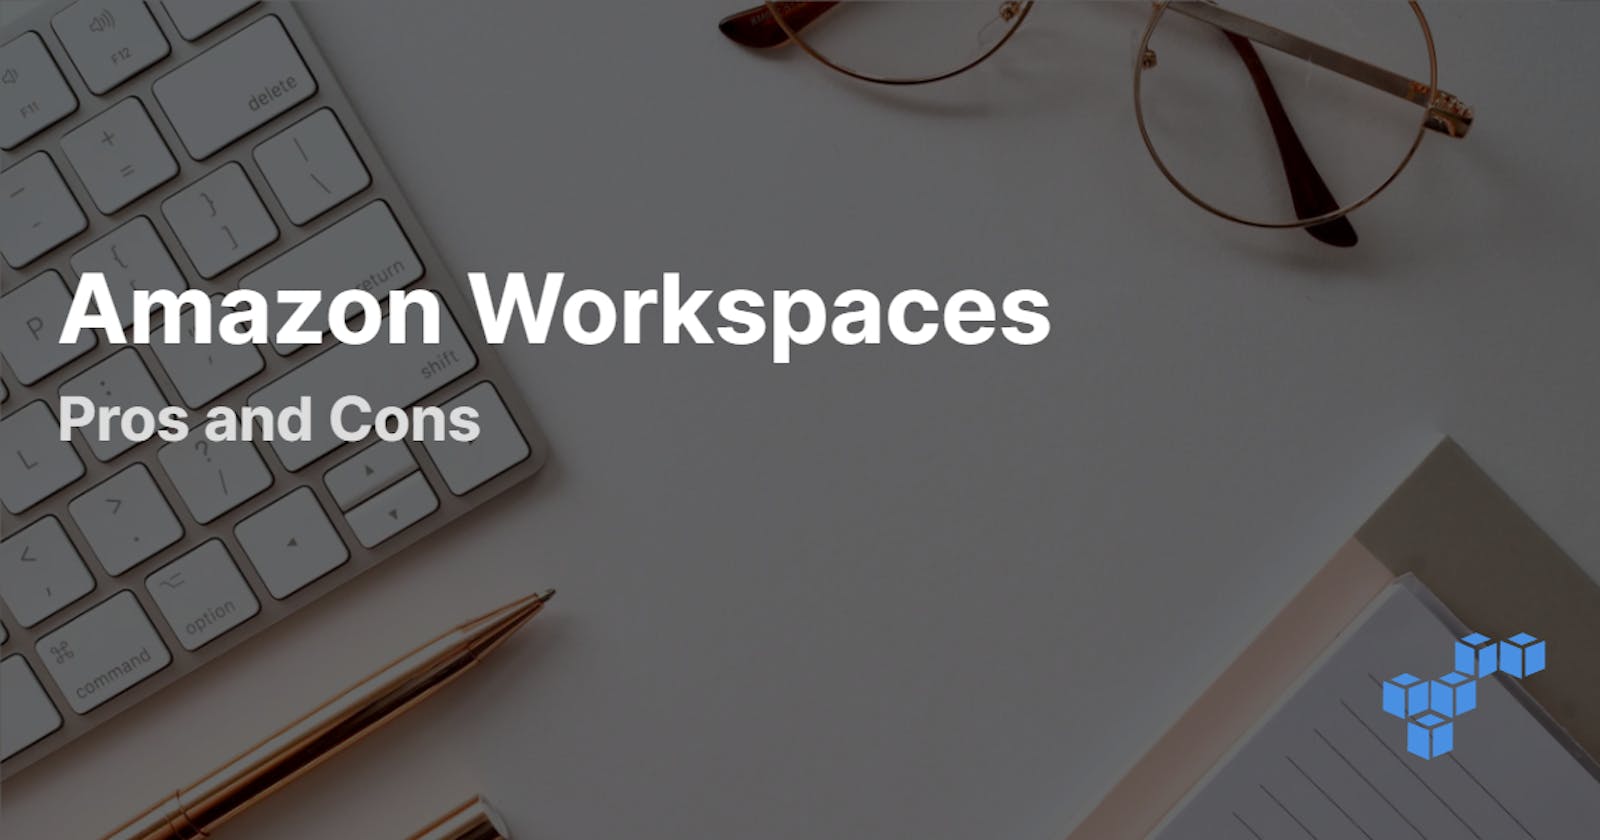 Pros and Cons of Amazon Workspaces